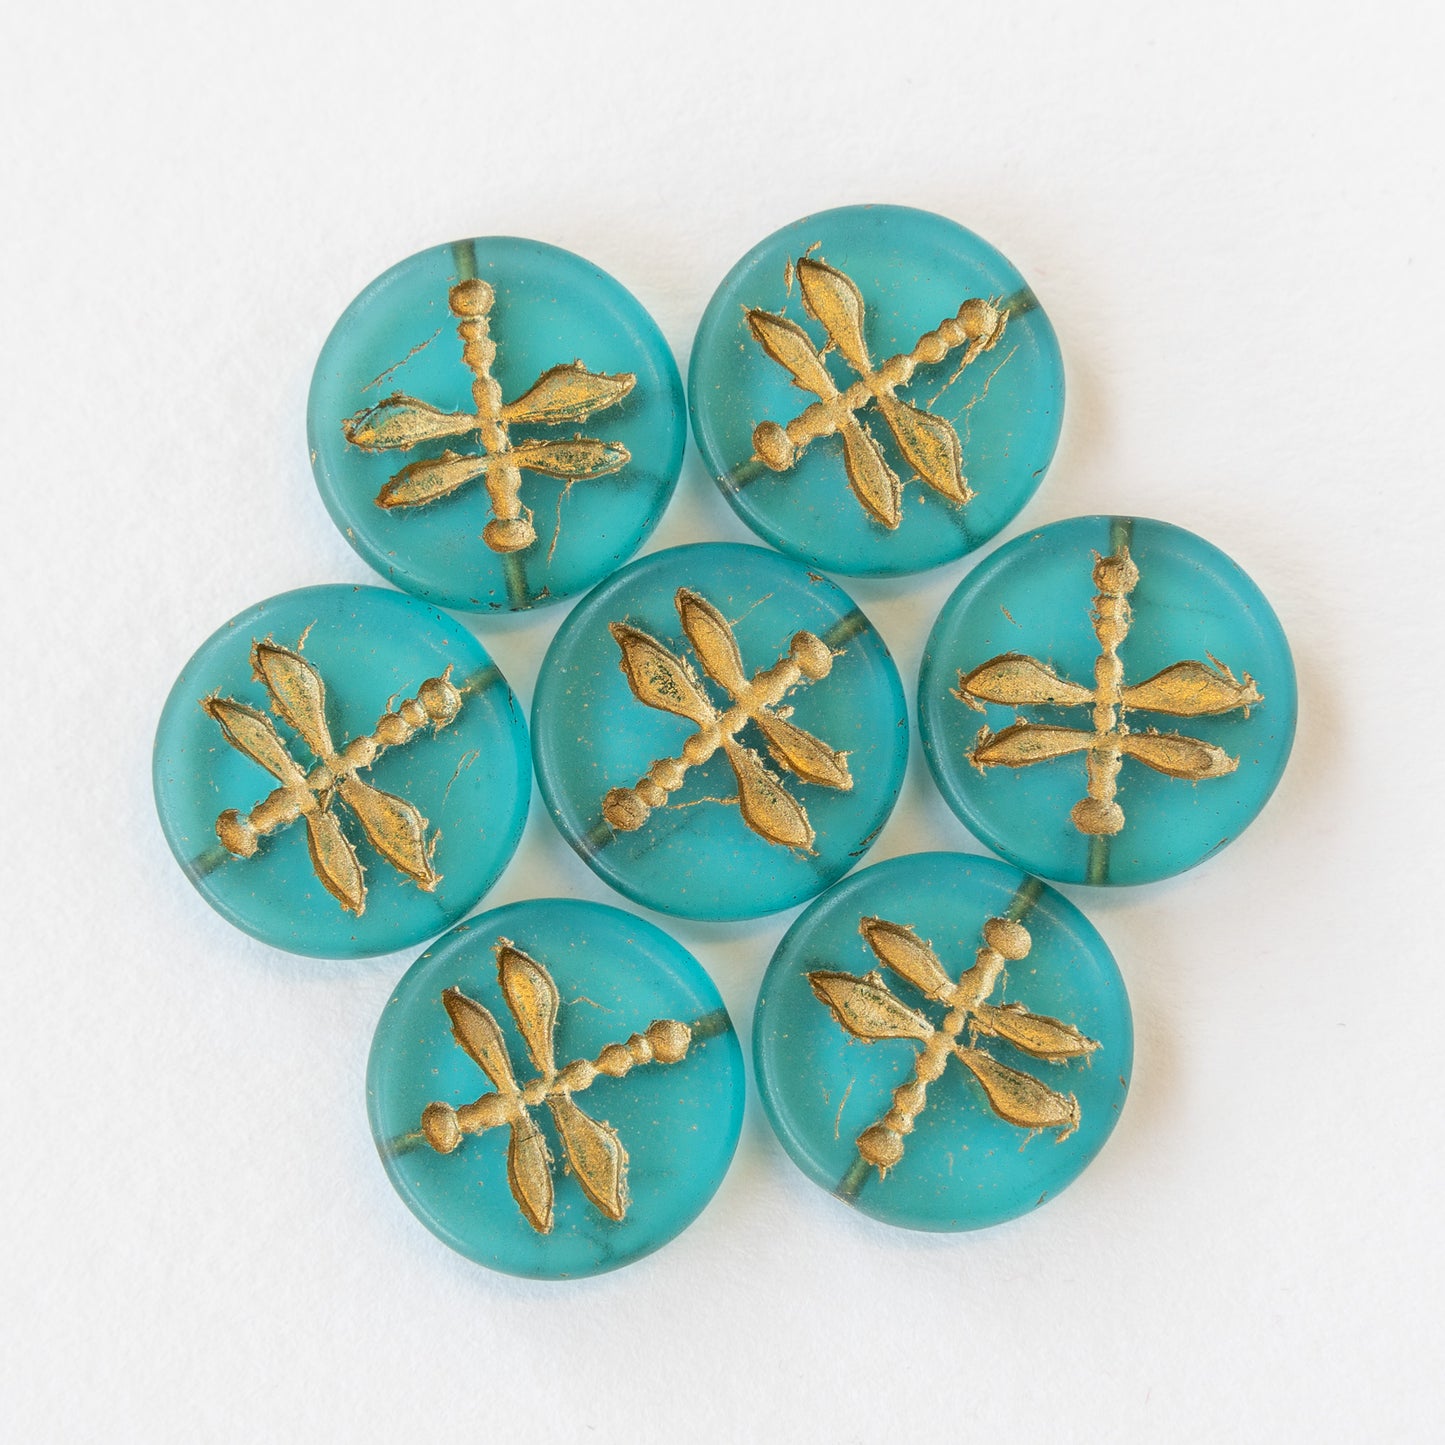 17mm Dragonfly Coin Beads - Teal with Gold Wash - 4 or 12